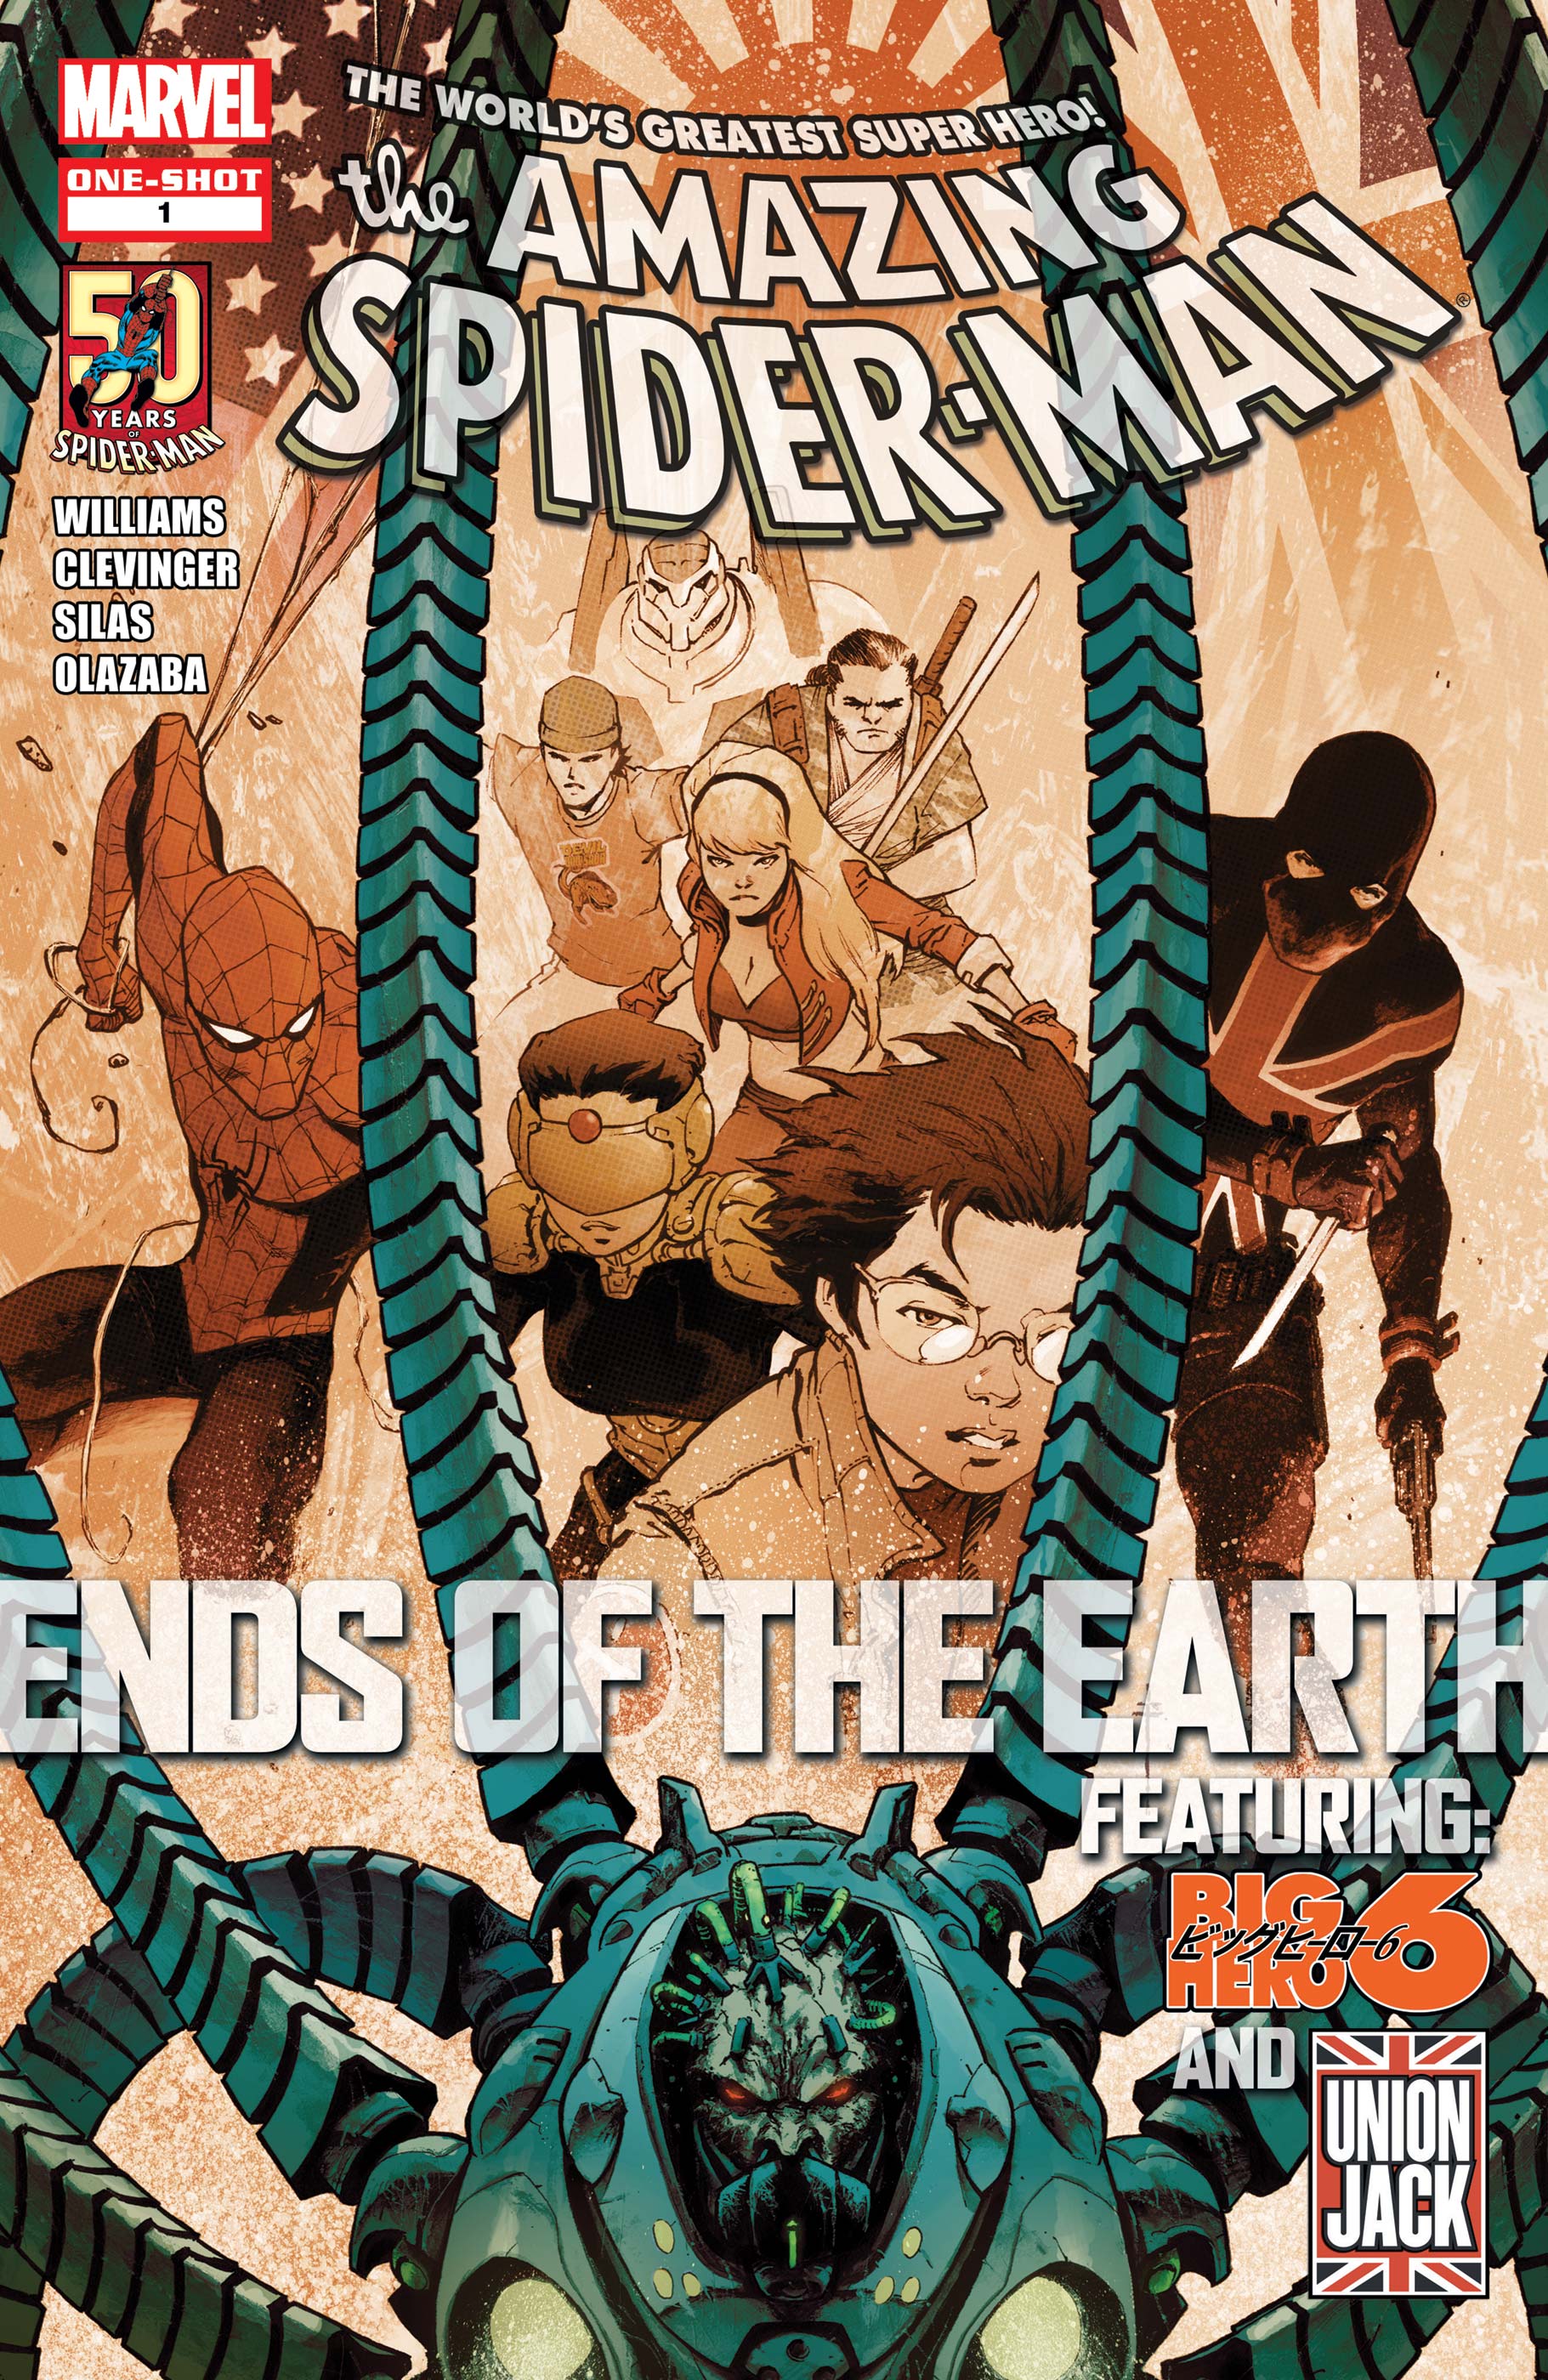 The ends of the earth spider man